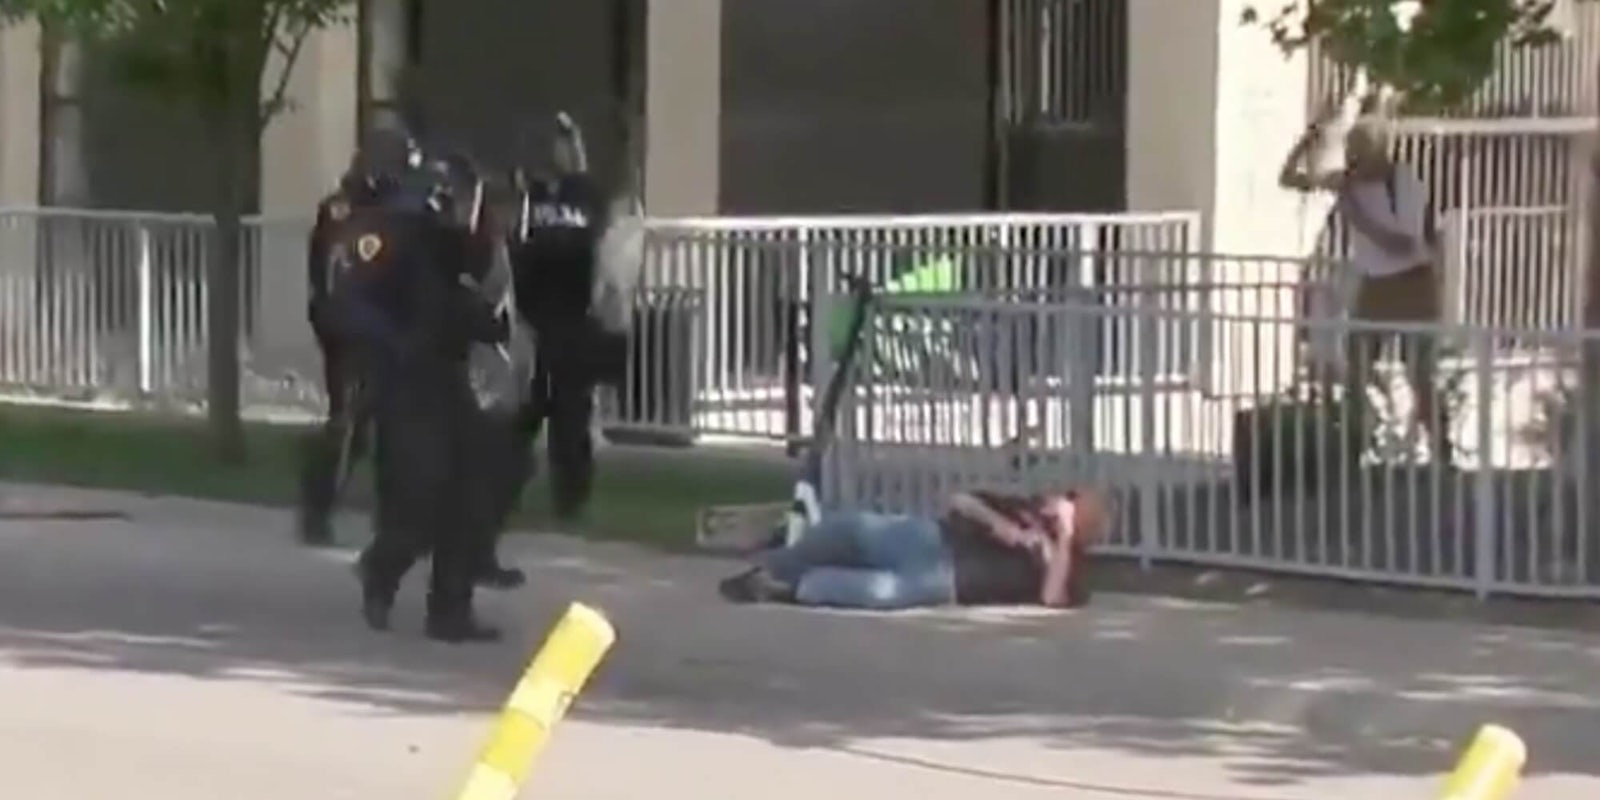 An old man laying on the pavement next to cops in riot gear